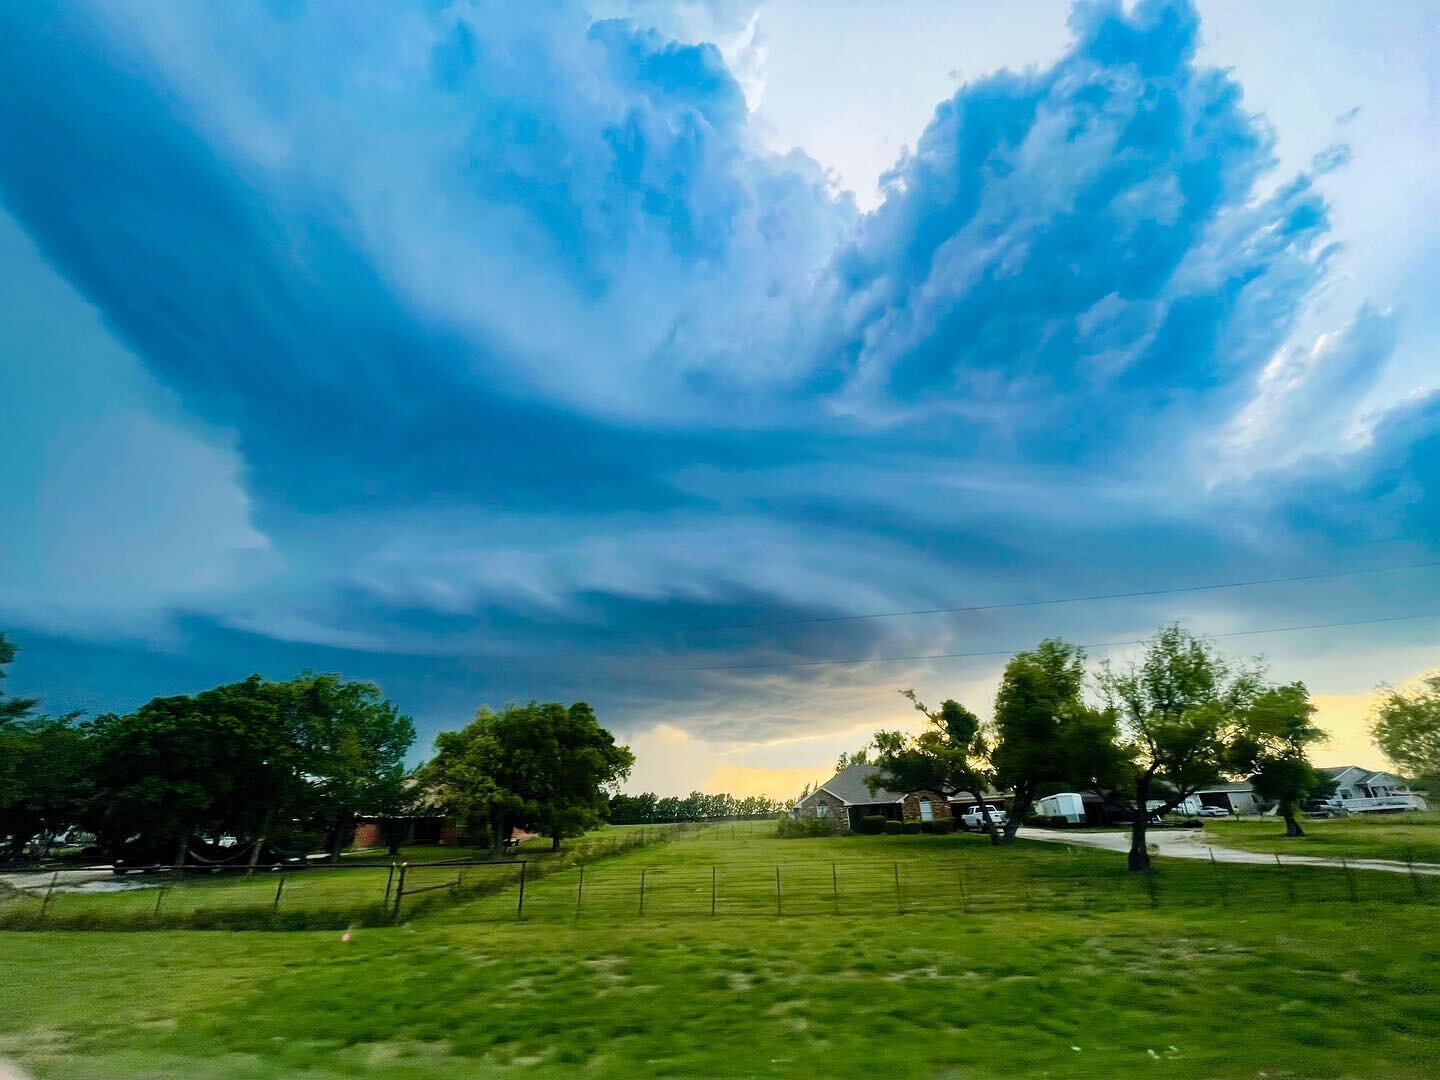 Storms are my favorite. The thrill and rush of catching the beginning of something so powerful takes my breath away. 

#stormchaser #texas #northtexas #summer #storms #clouds #sky #at #photography #landscapephotography